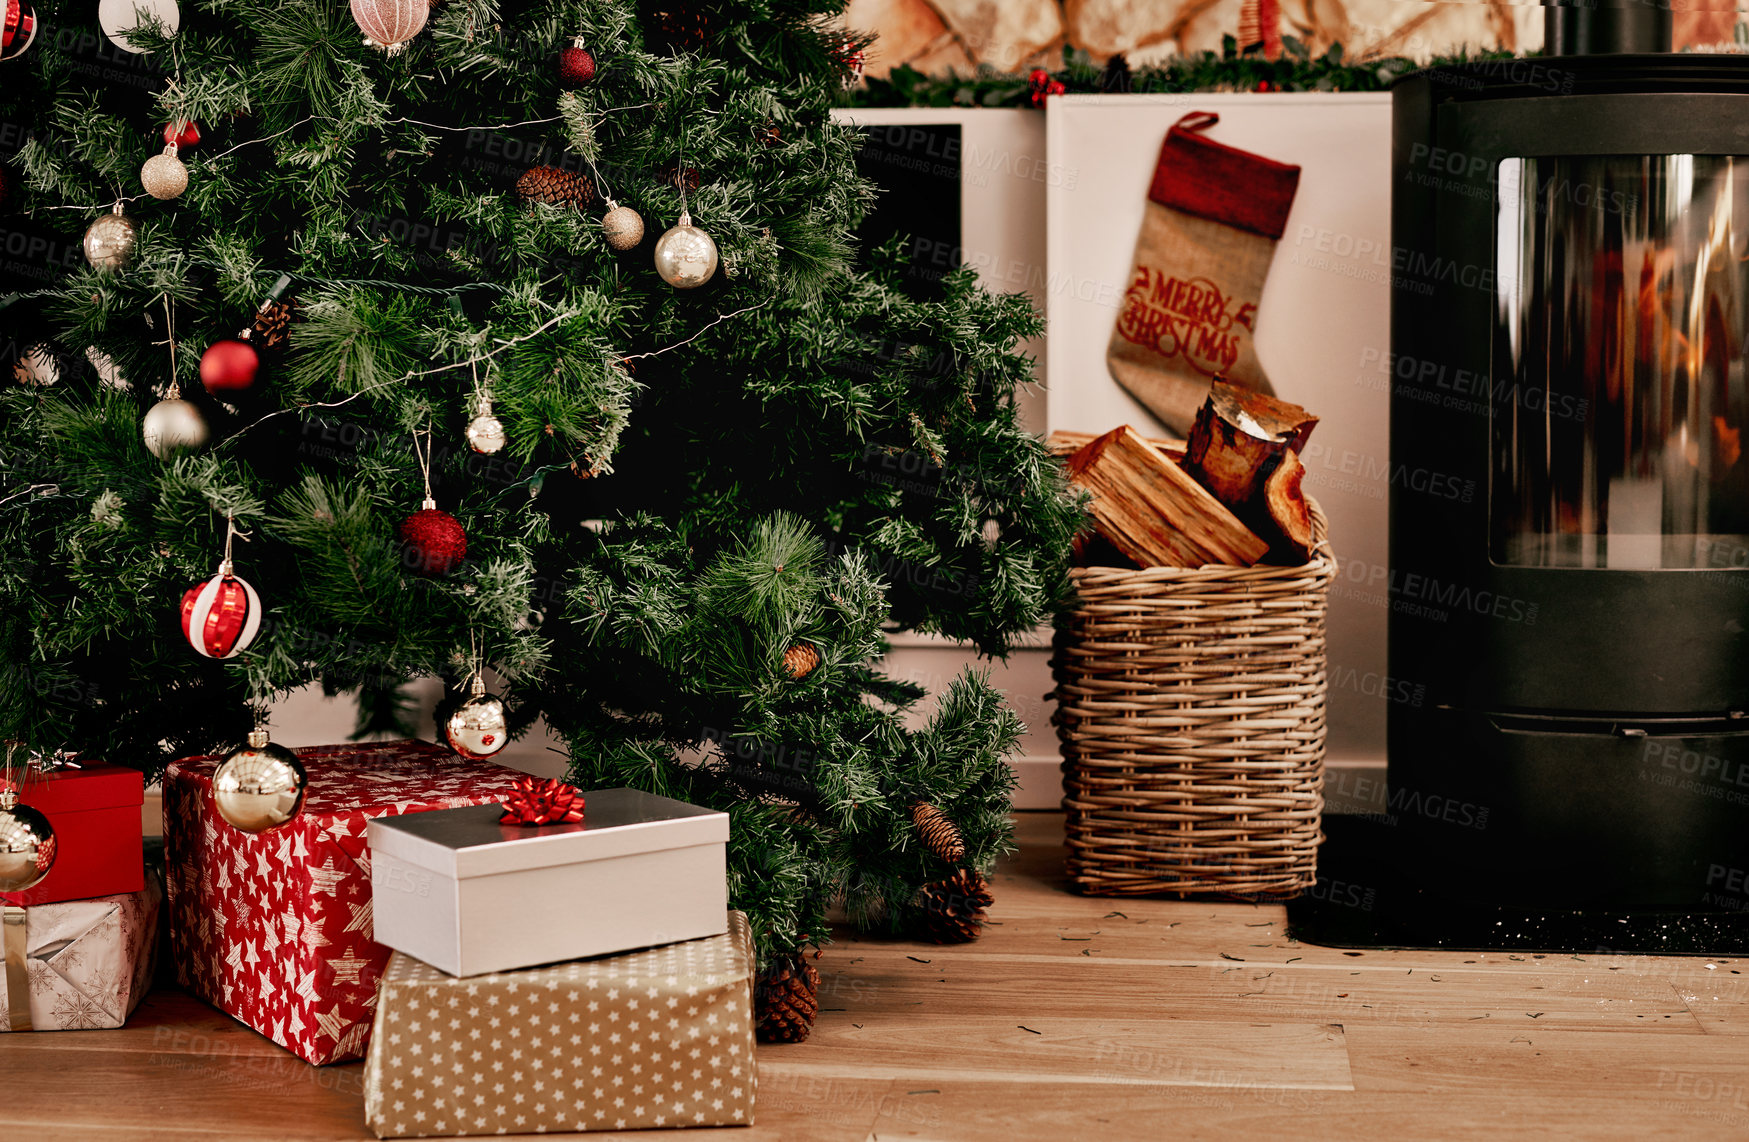 Buy stock photo Christmas, tree and gift with a present, package or box wrapped on a living room floor in an empty home during the holidays. Background, wood and fireplace in a house for festive season celebration